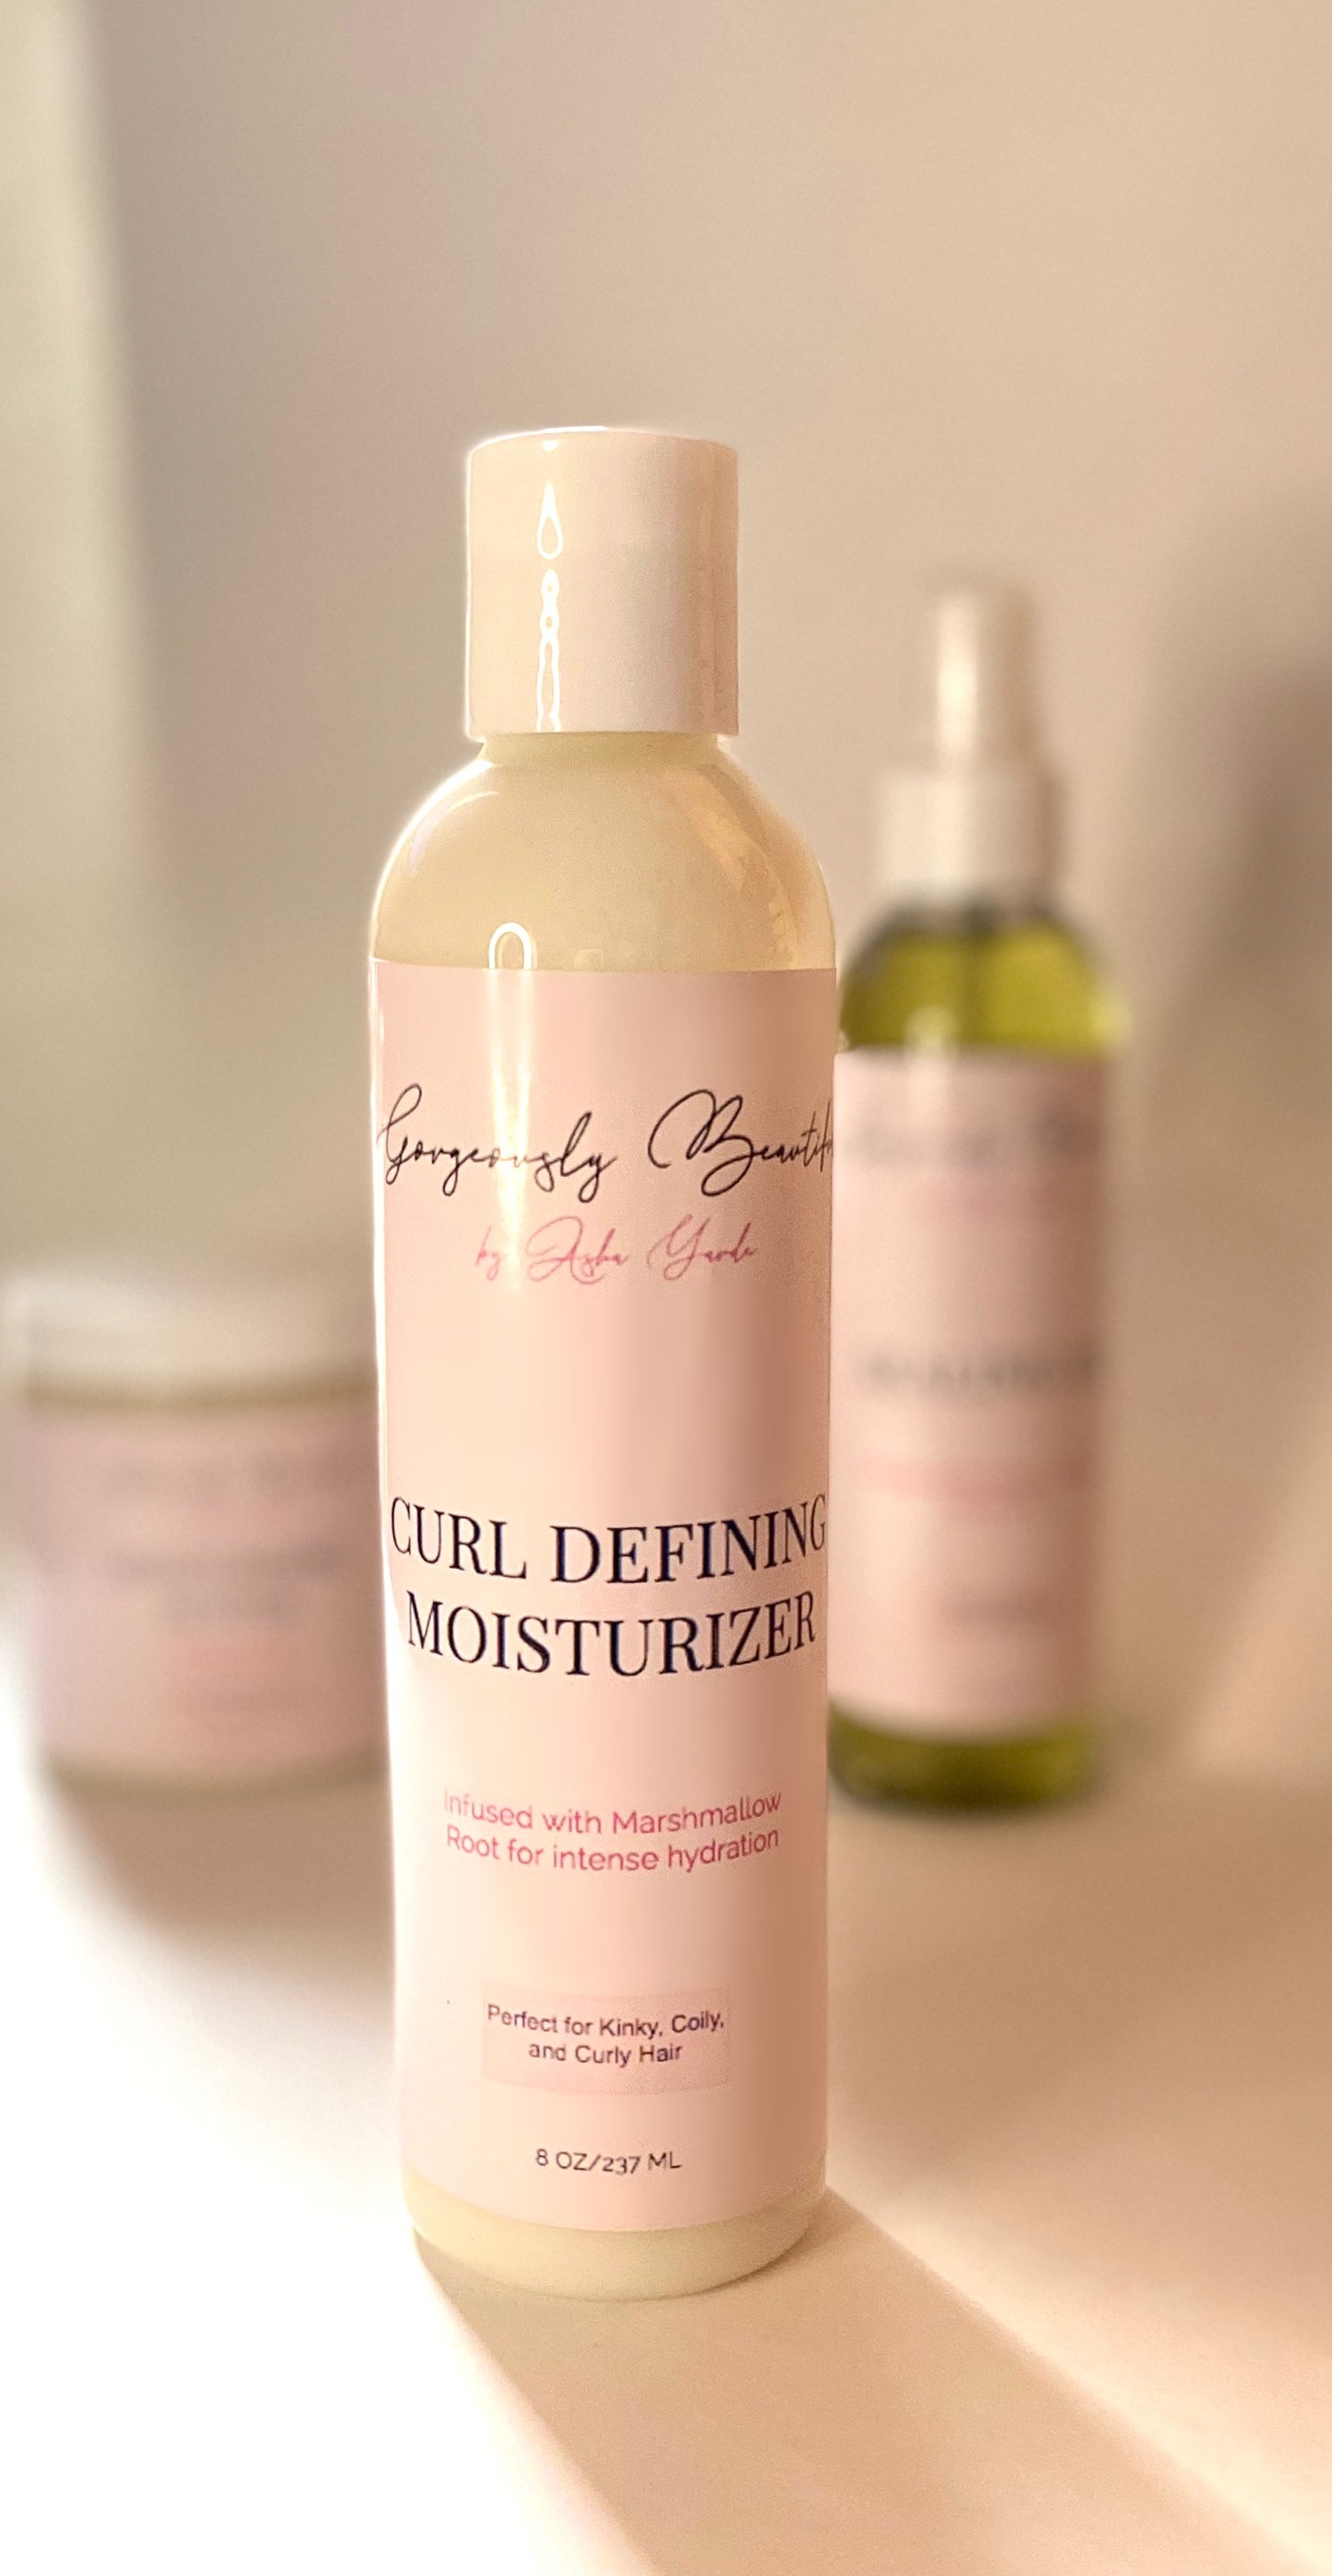 This Gorgeously Beautiful Curl Defining Moisturizer is a light weight, smooth and creamy moisturizer that instantly hydrates while defining the hair. No need for gel to get defined curls! This moisturizer is enriched with Marshmallow Root, providing enough slip to easily remove tangles and melt knots.